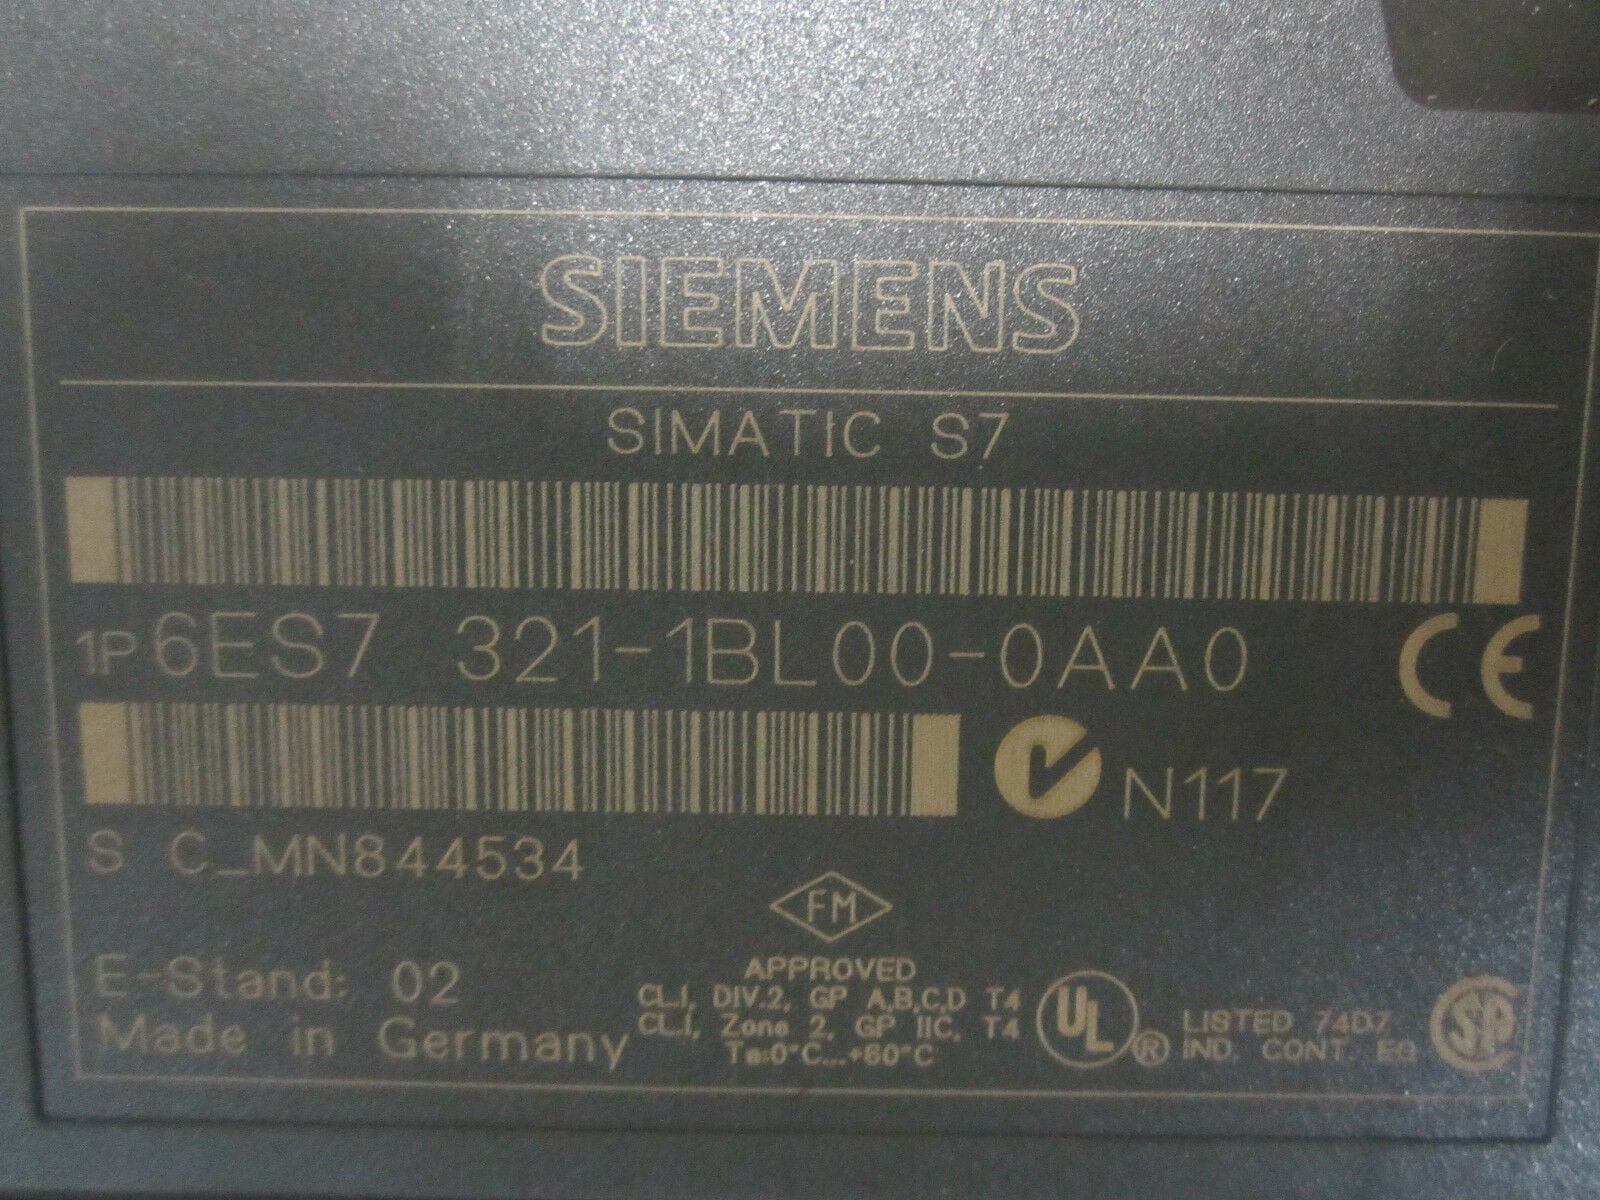 5 Siemens Simatic S7 6ES7 321-1BL00-0AA0 Simatic E-Stand 